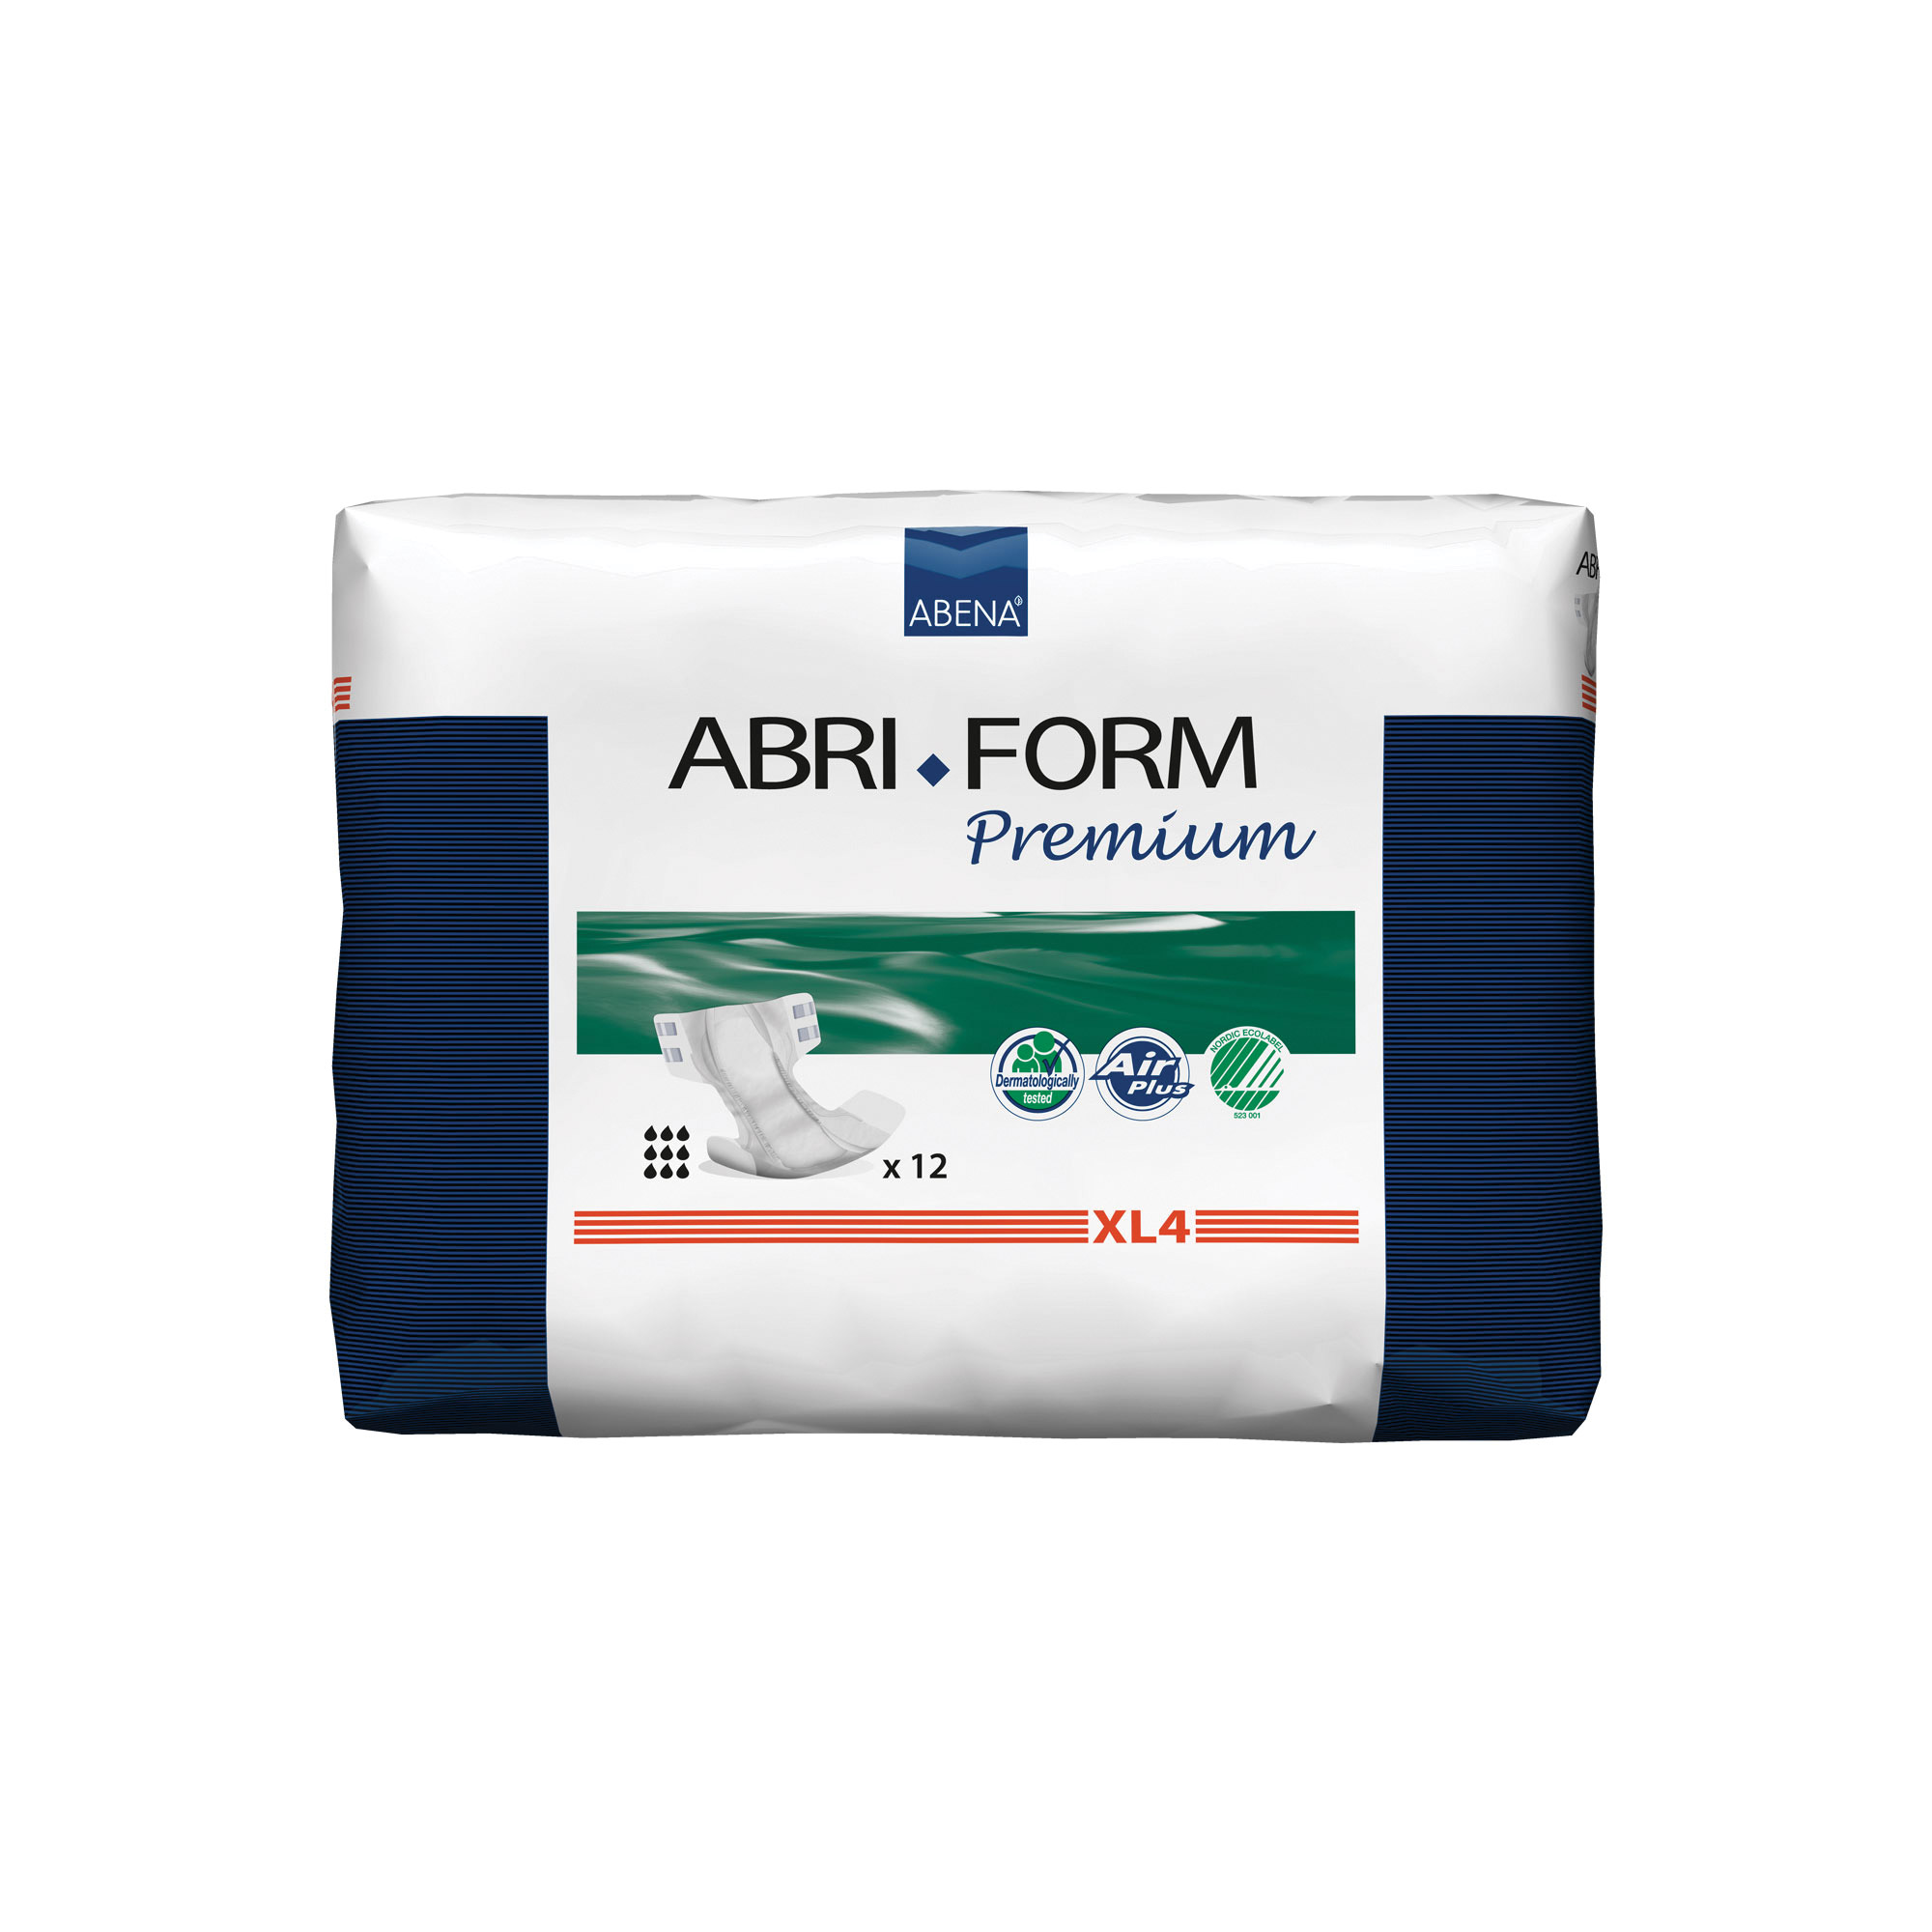 Abri-Form Premium Xl4 - X-Large All In One - 12 Pack